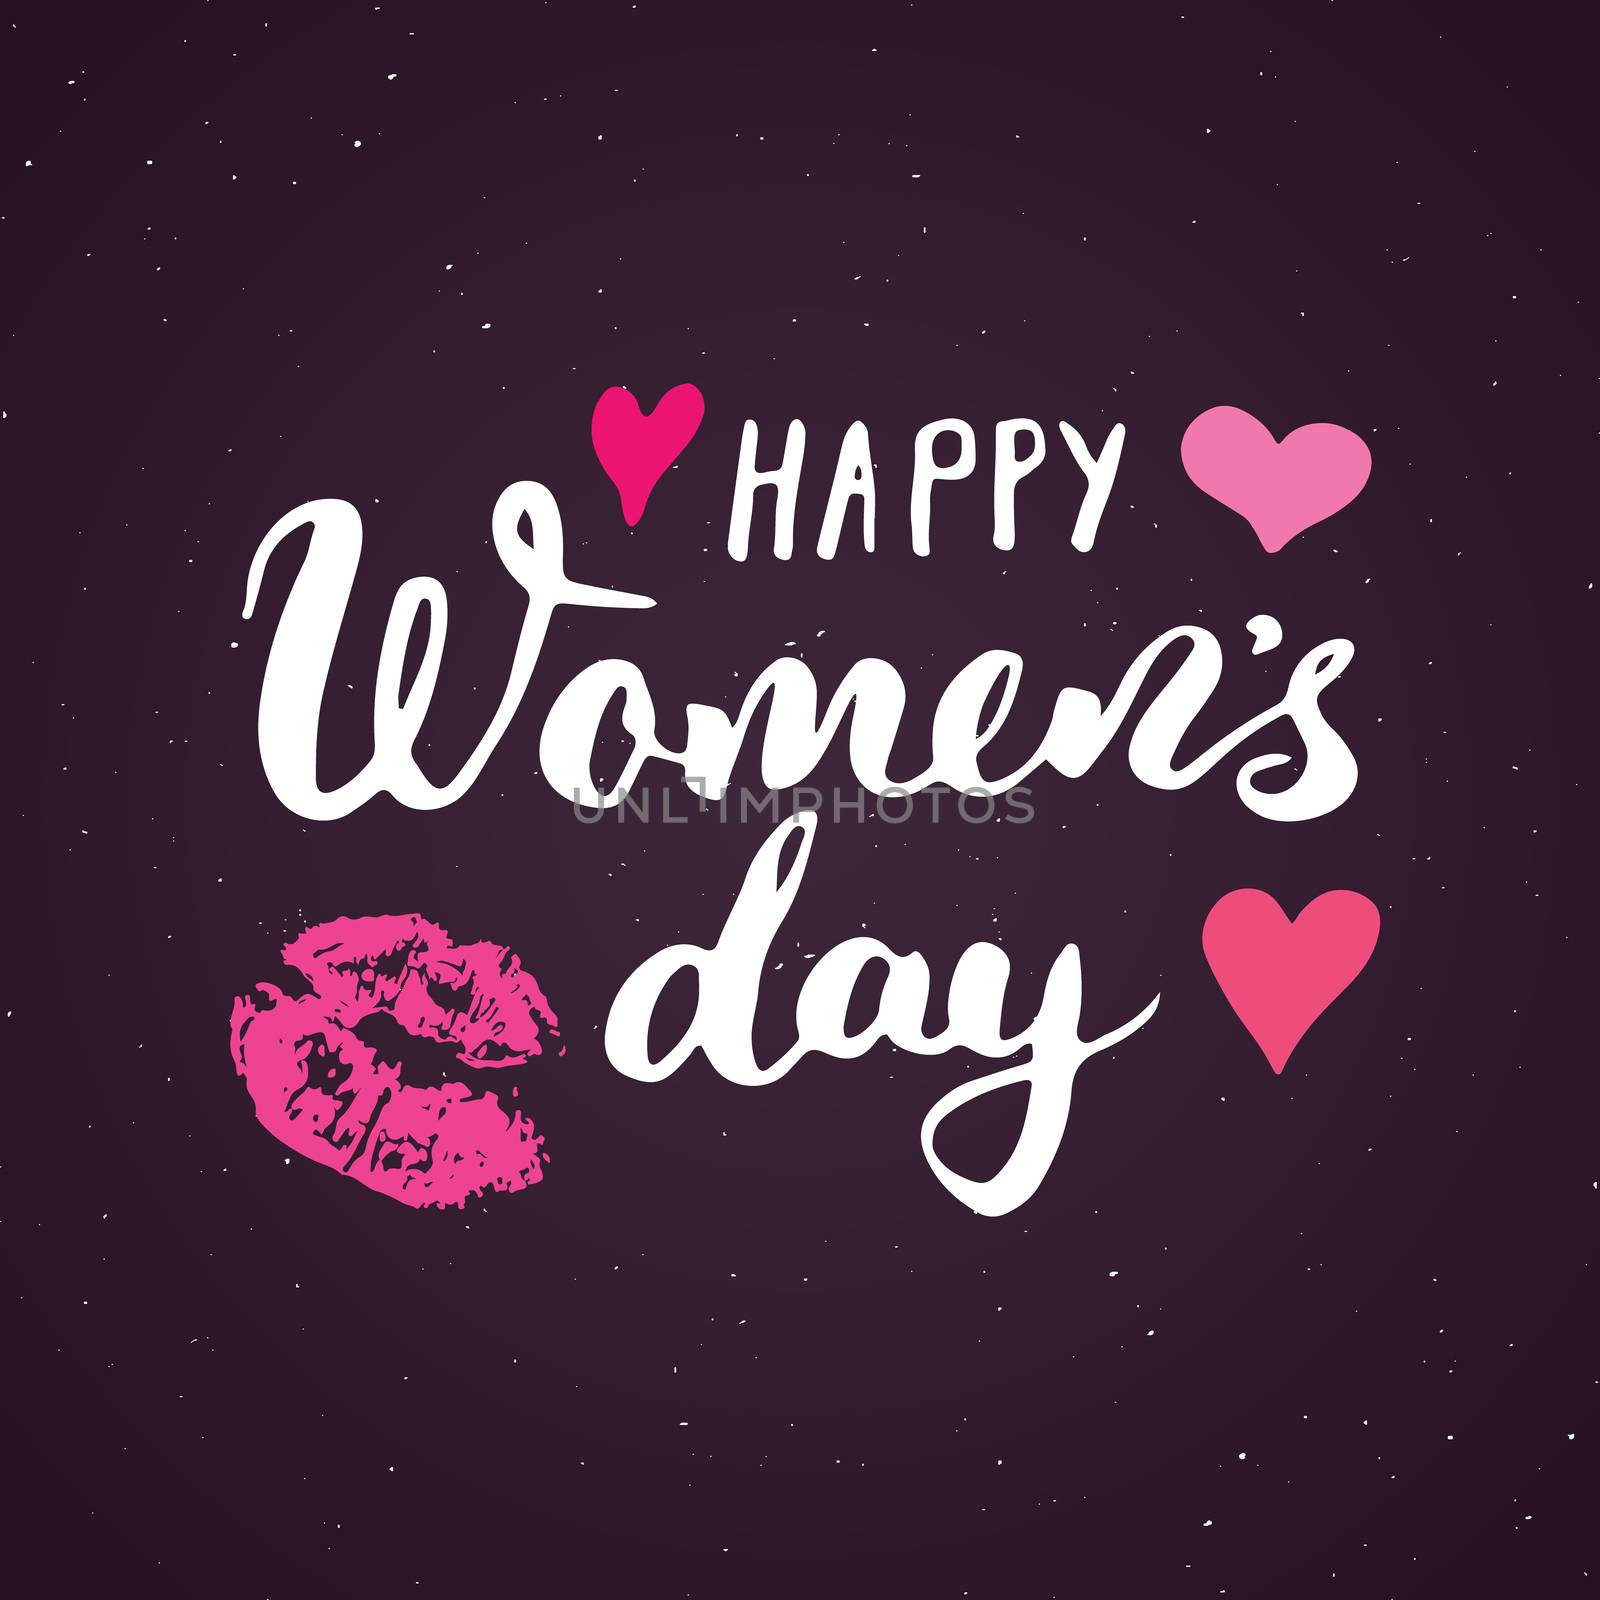 Happy Women's Day Hand letterings set. Holiday grunge textured retro design greeting cards vector illustration.